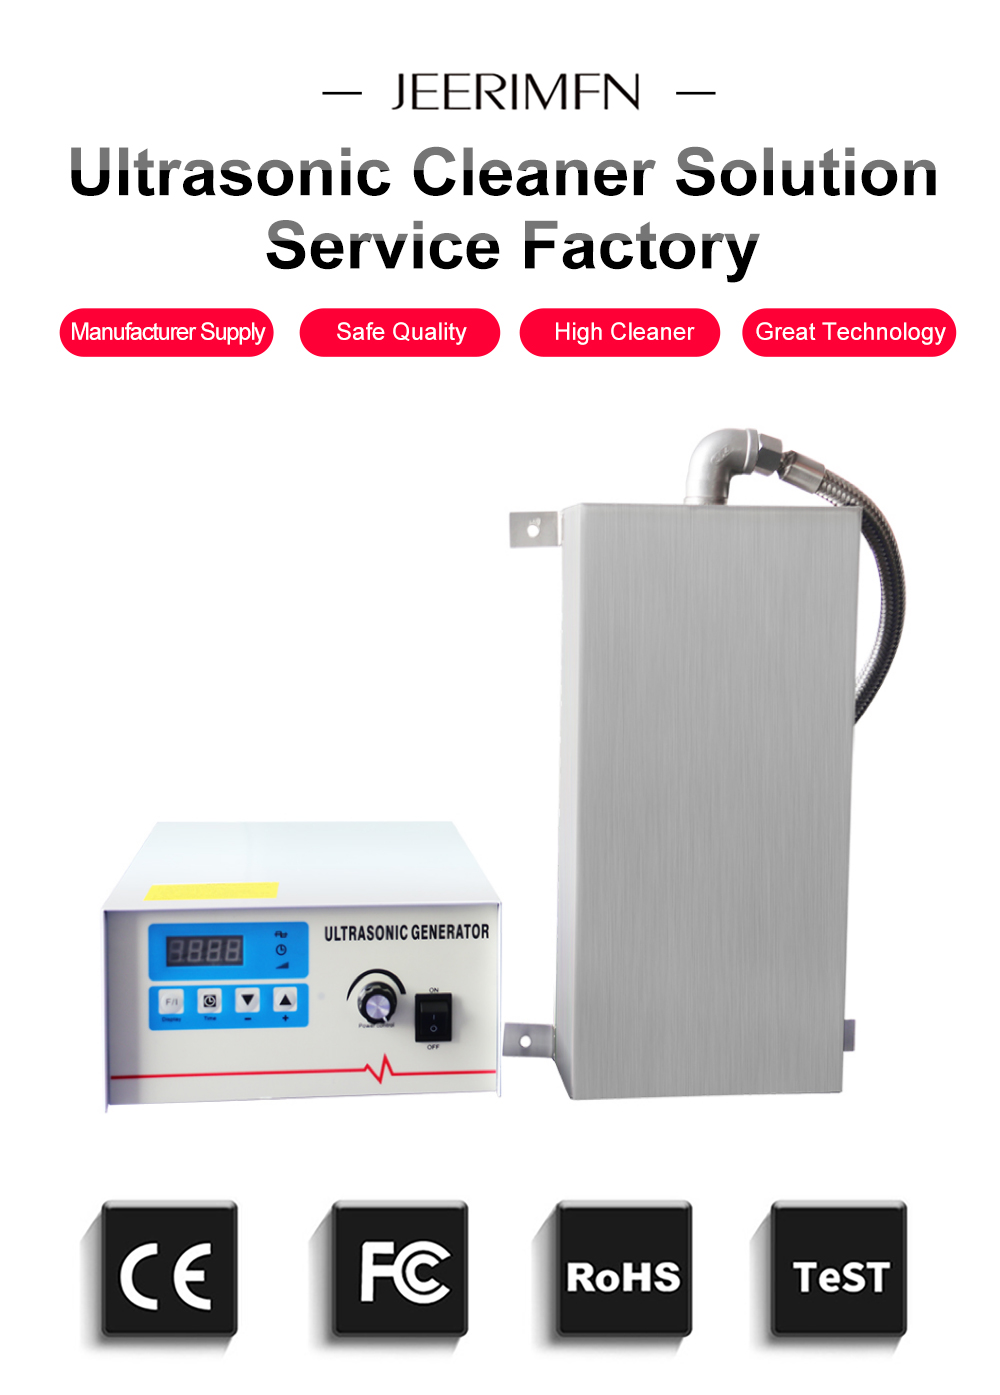 1200W Industry Ultrasonic Cleaner Vibrate Time Set Engine Block DPF Tool Part Ultrason Cleaner Degreaser Mold Golf Ball Motor